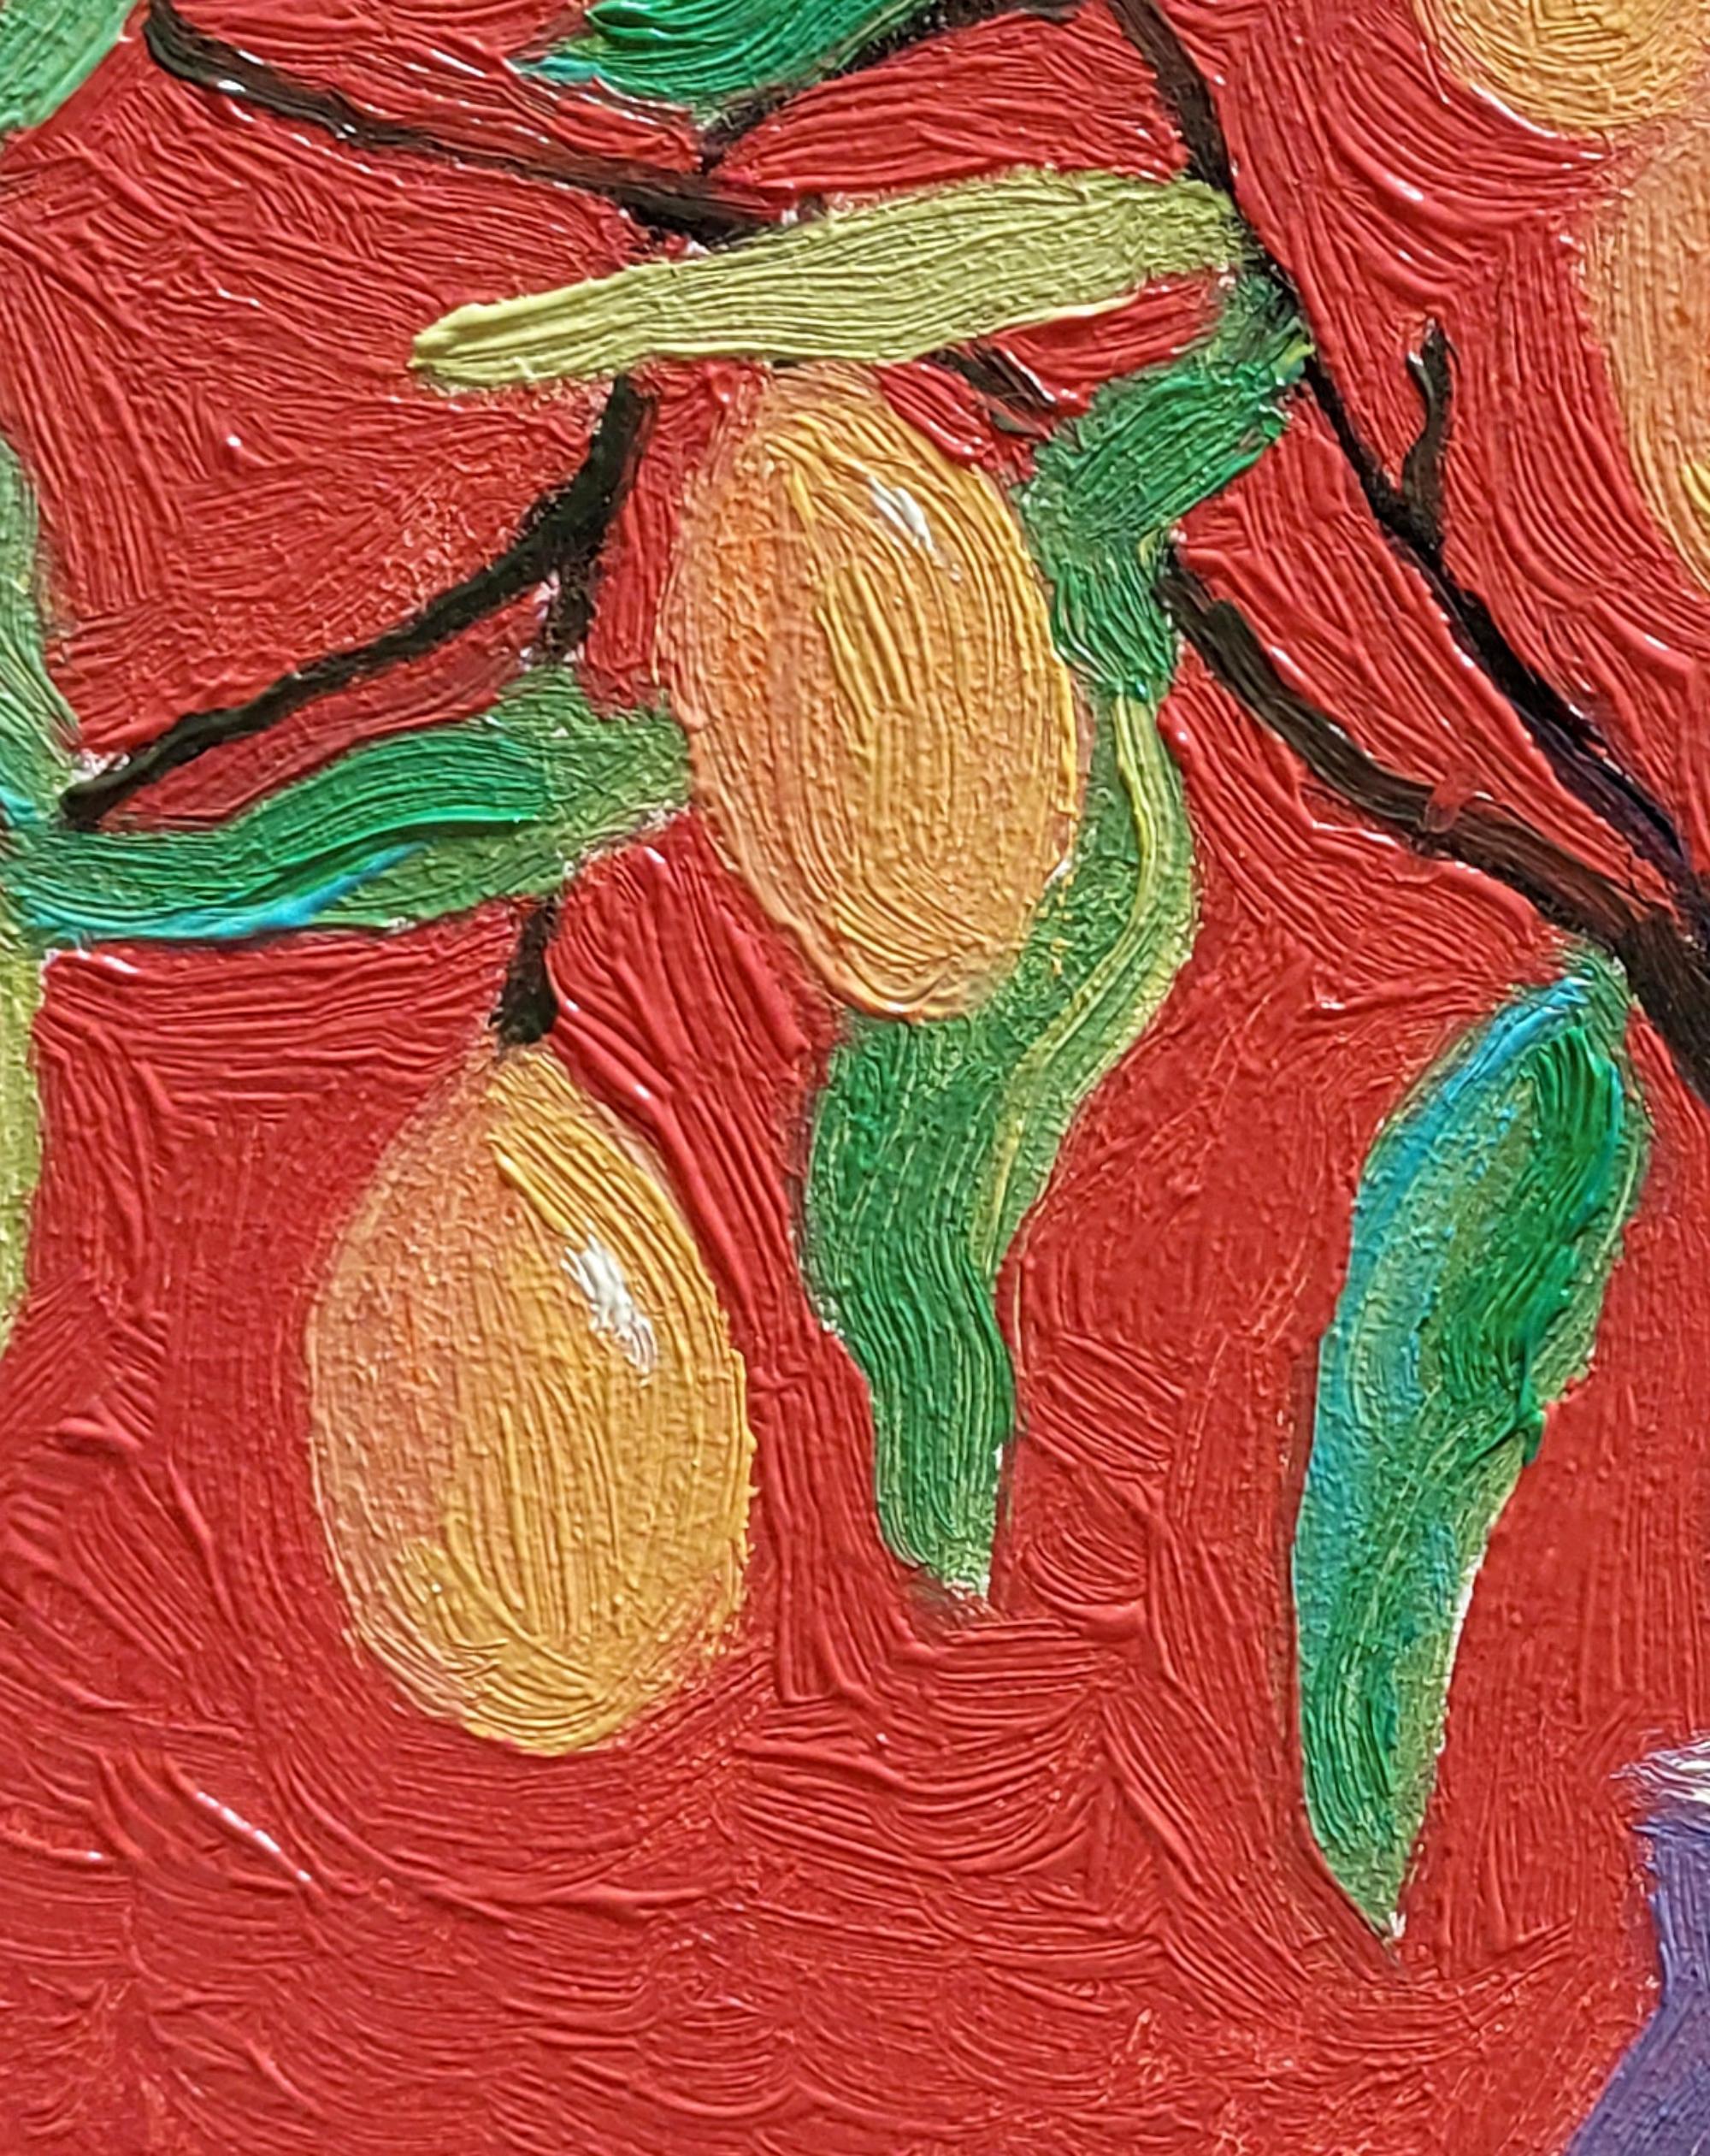 Sweet and Sour Original Oil Painting Lemon Tree by Ksenia Tsyganyuk For Sale 3